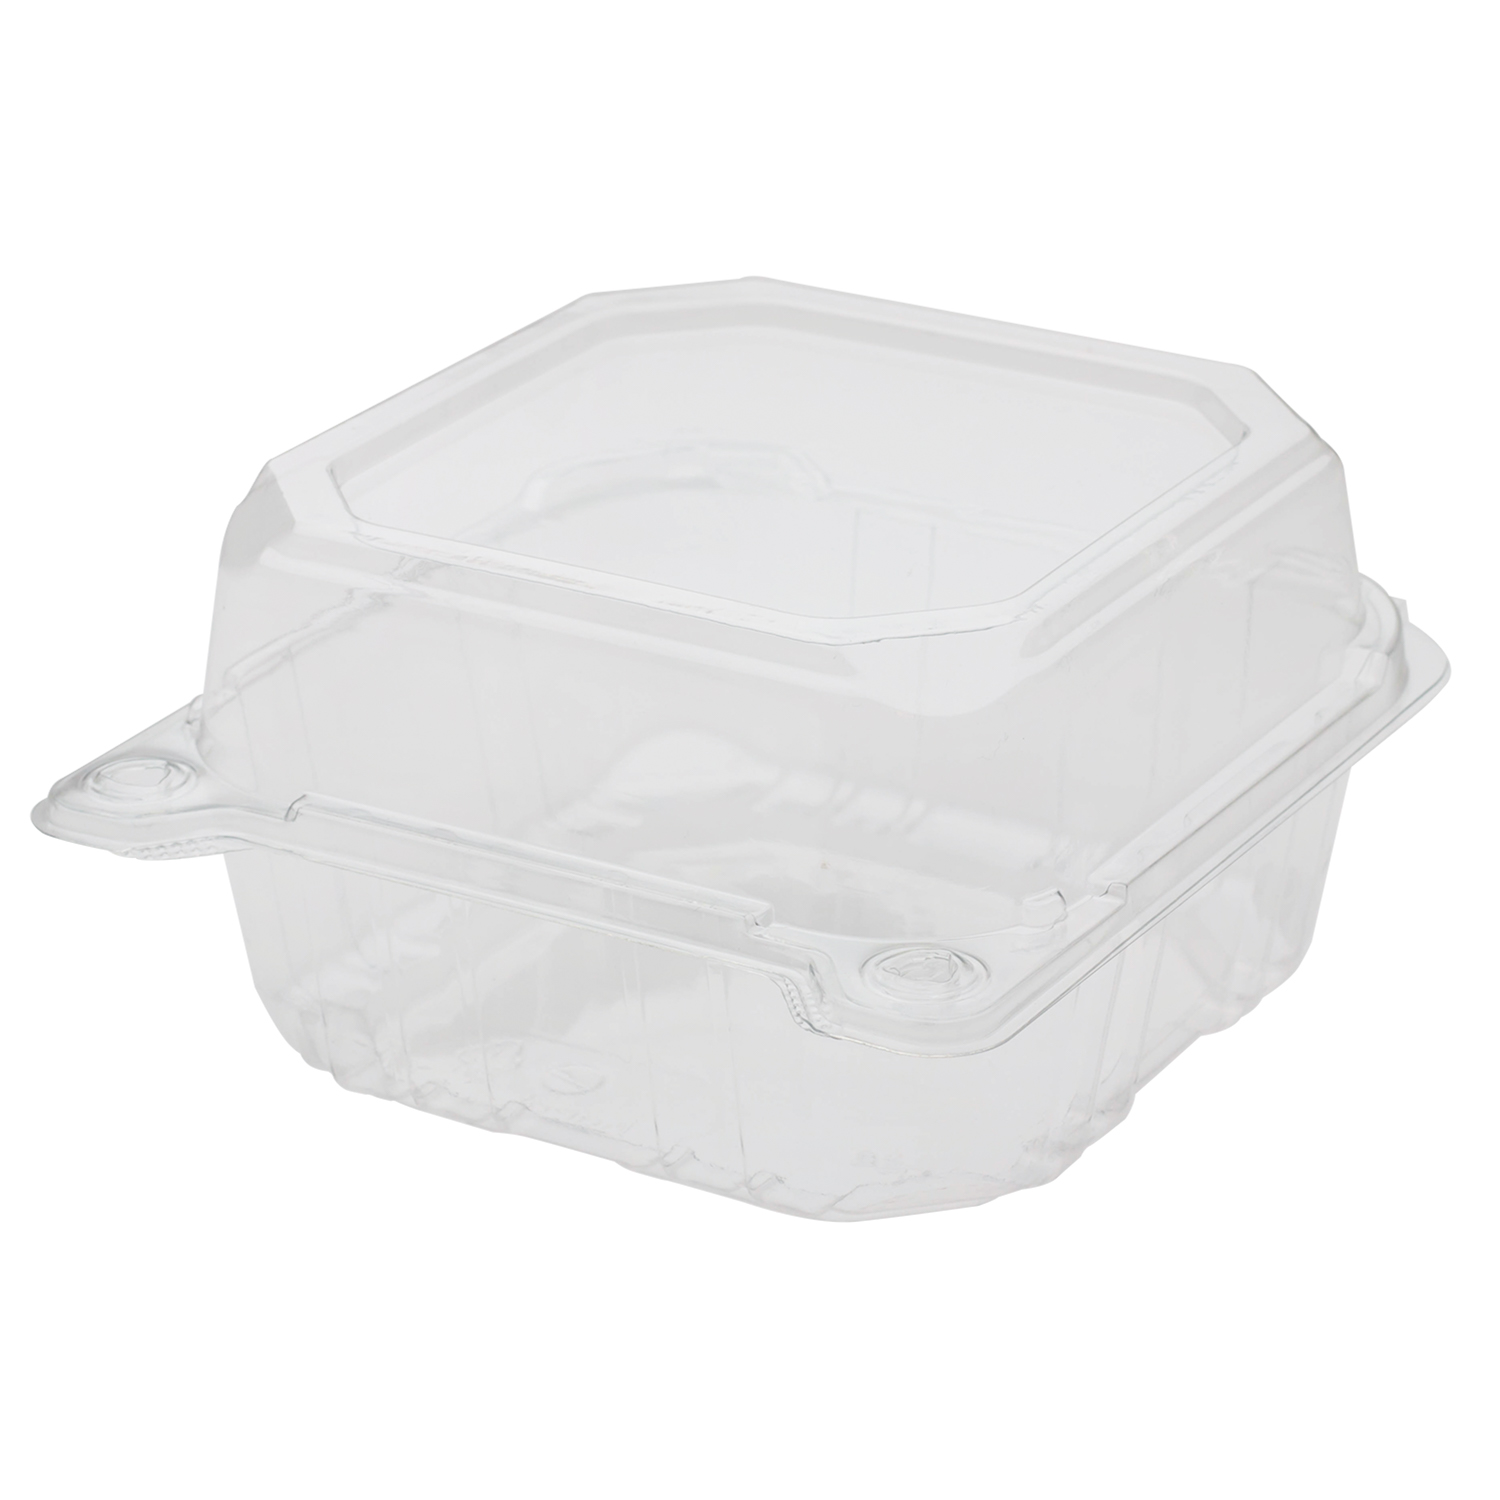 Avant Grub Food Storage Container, Grease-Proof 6x6 Clamshell